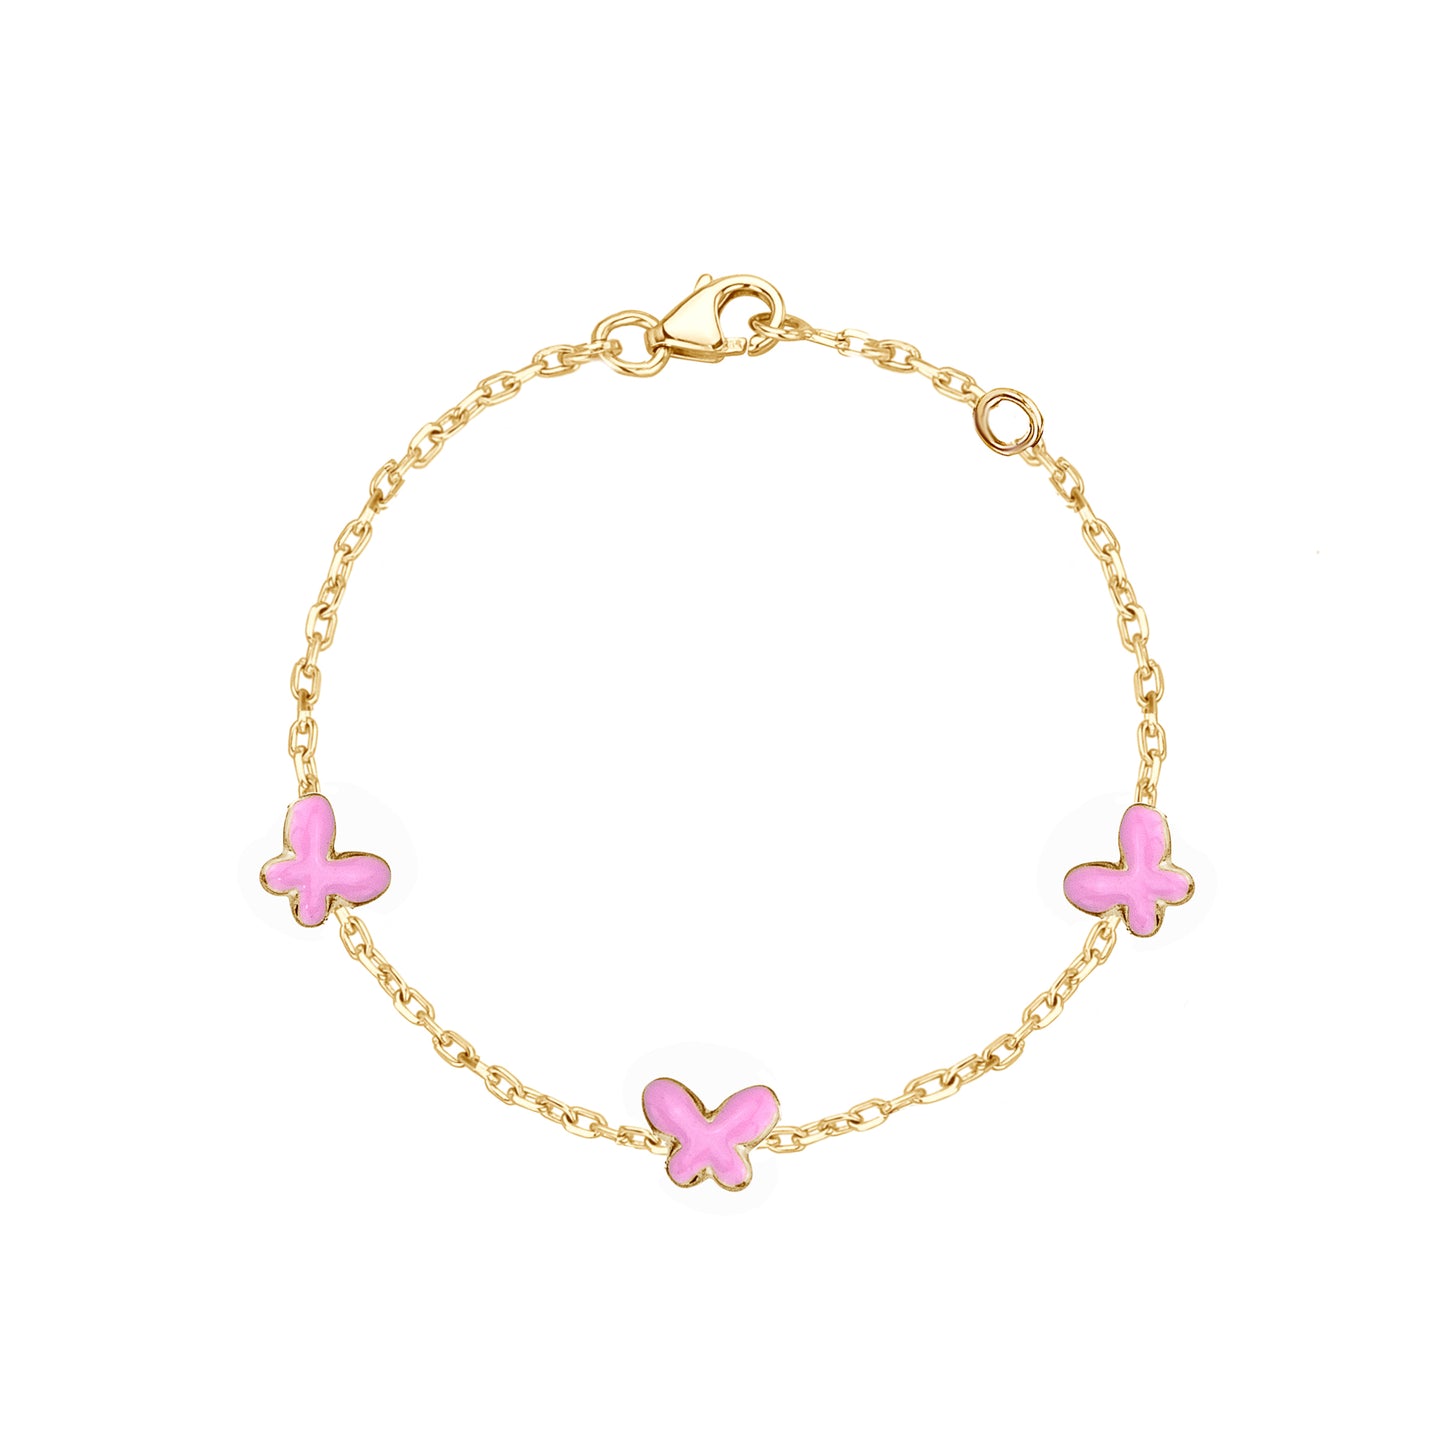 Baby bracelet id from gold plated sterling silver in Thessaloniki